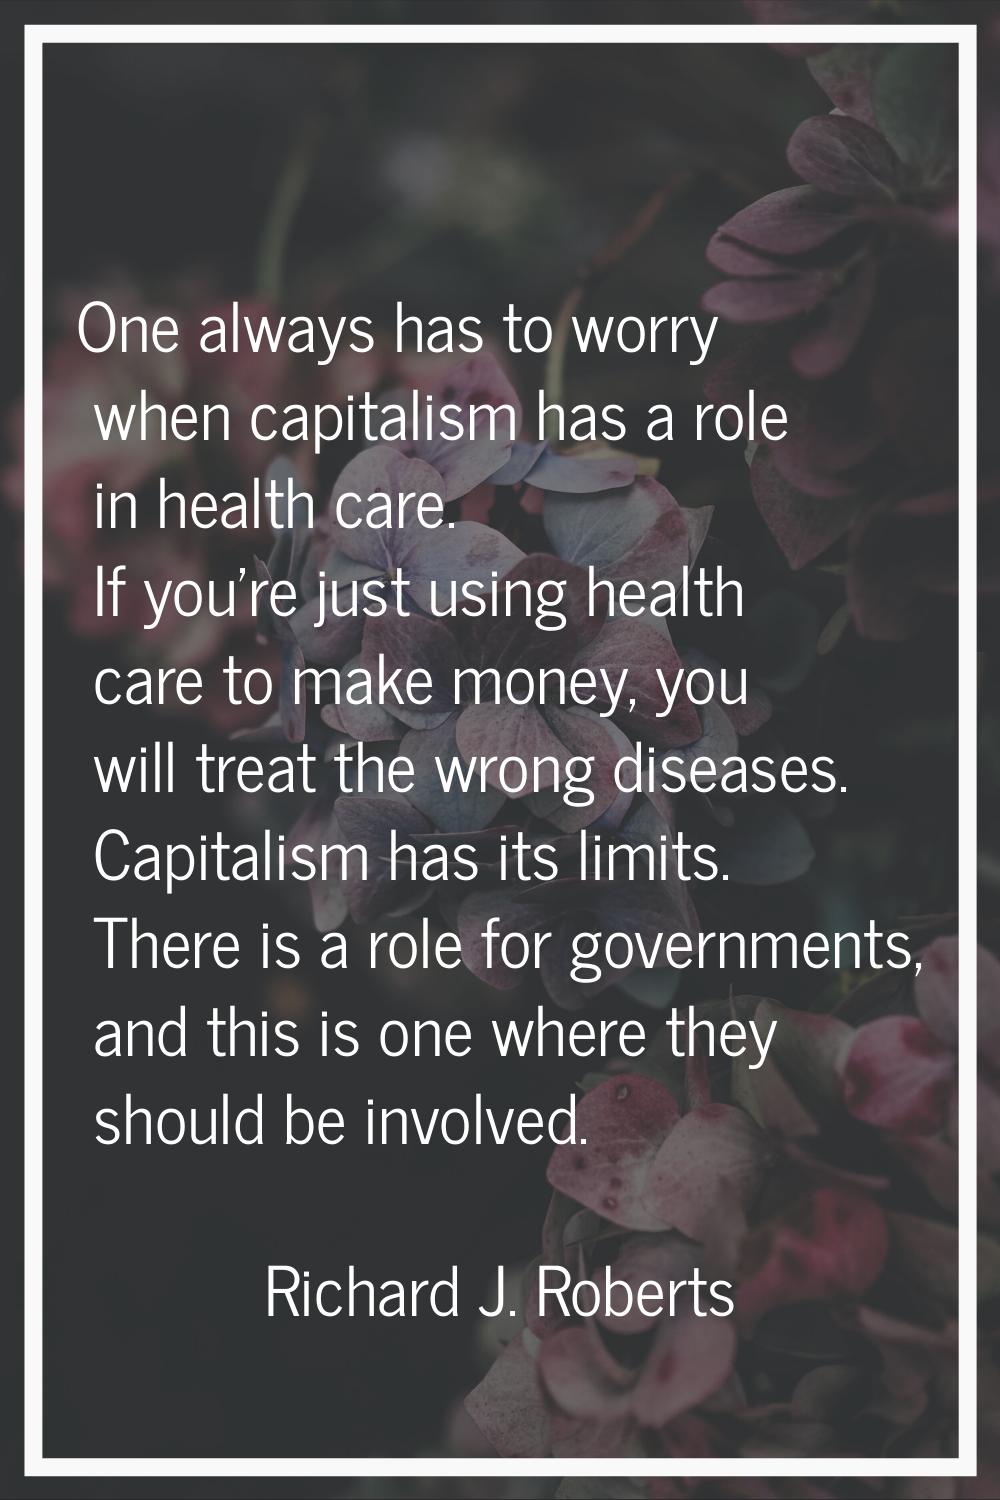 One always has to worry when capitalism has a role in health care. If you're just using health care